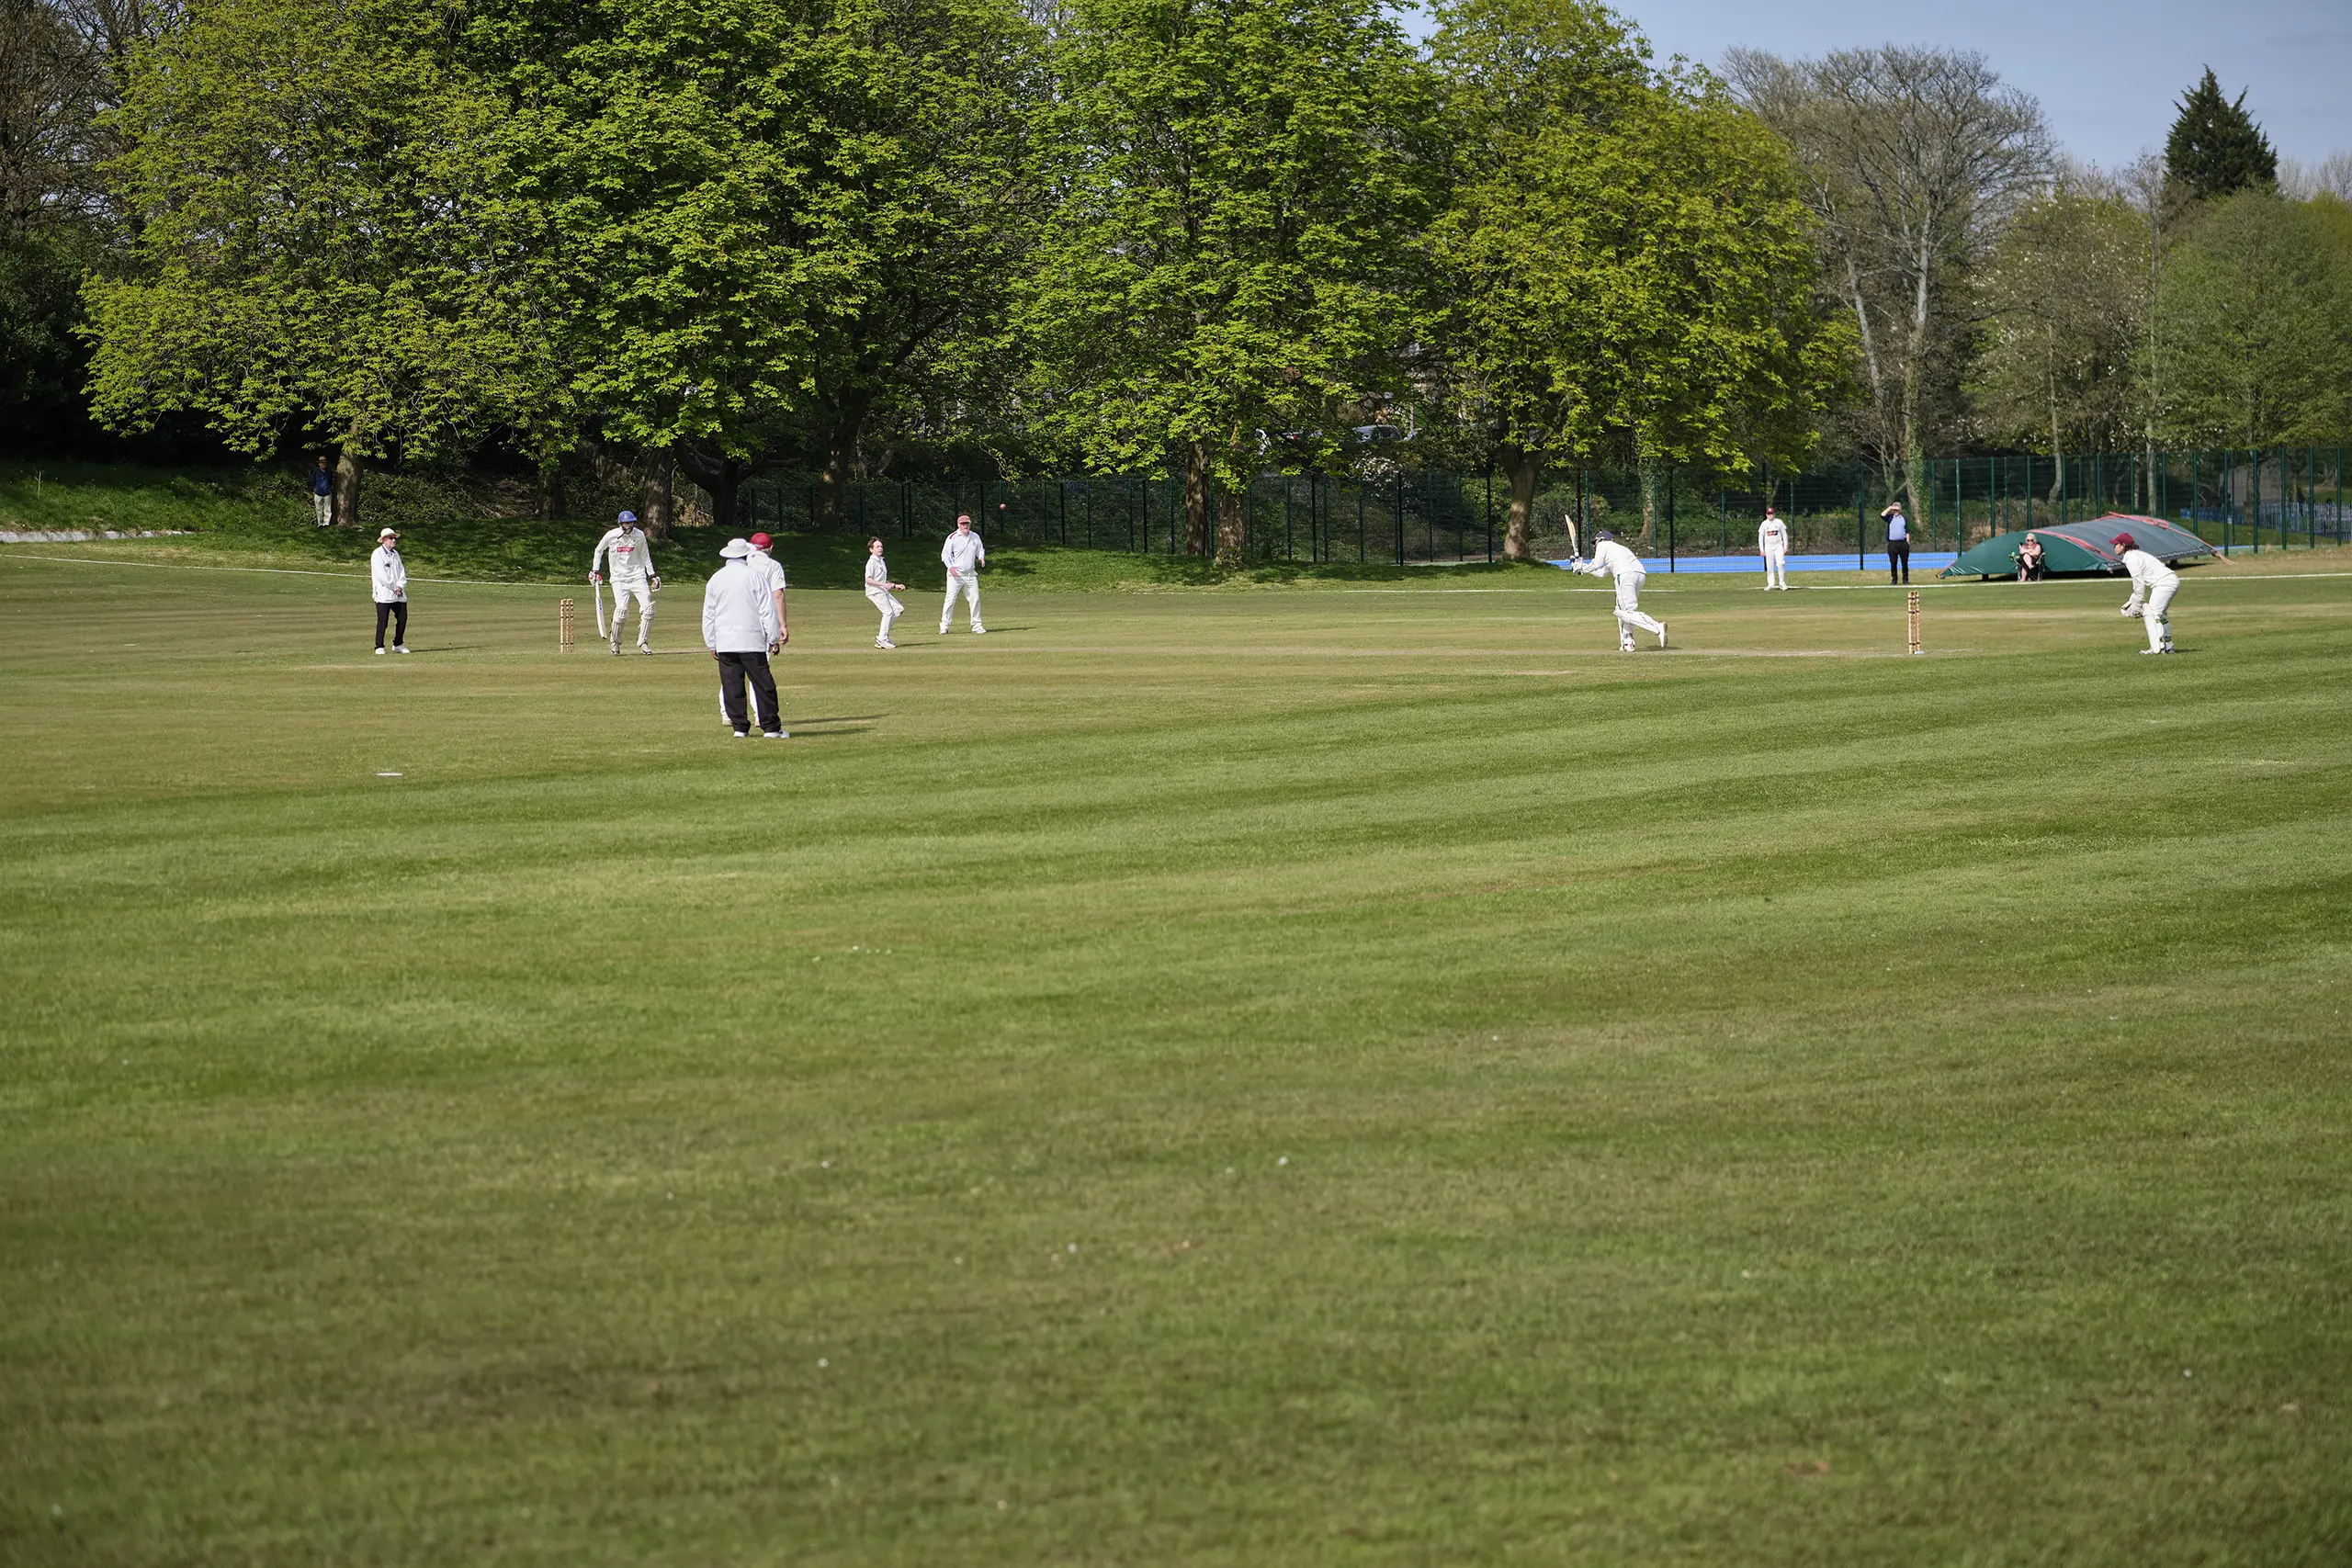 Stand cricket club, Whitefield